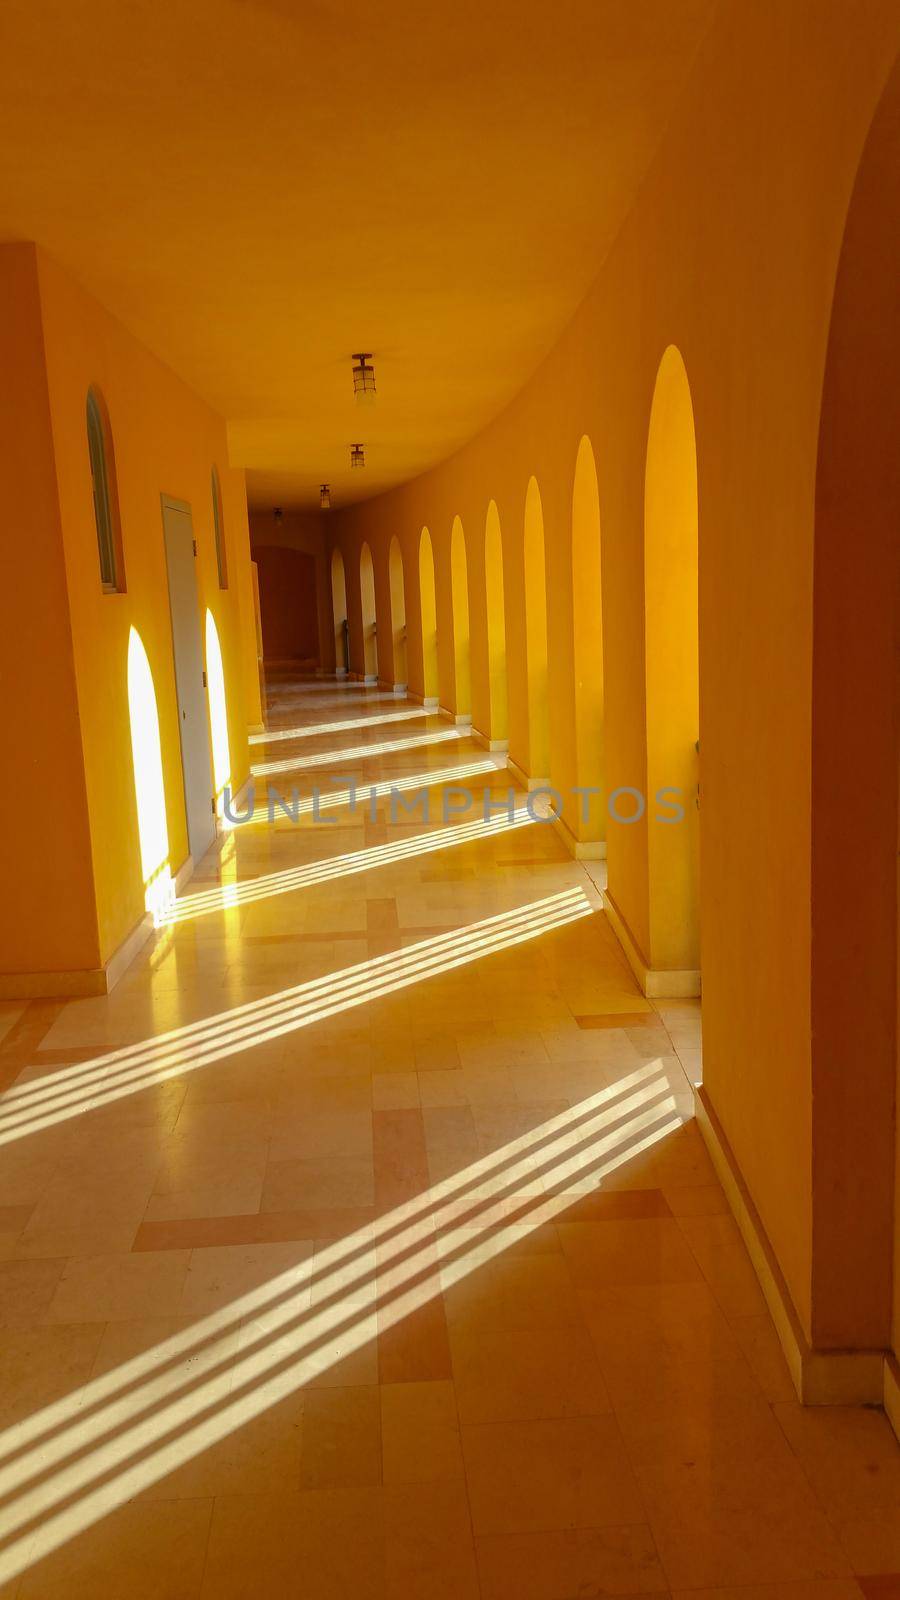 a long corridor, a hall in orange and the rays of the sun from the windows cross it by zakob337